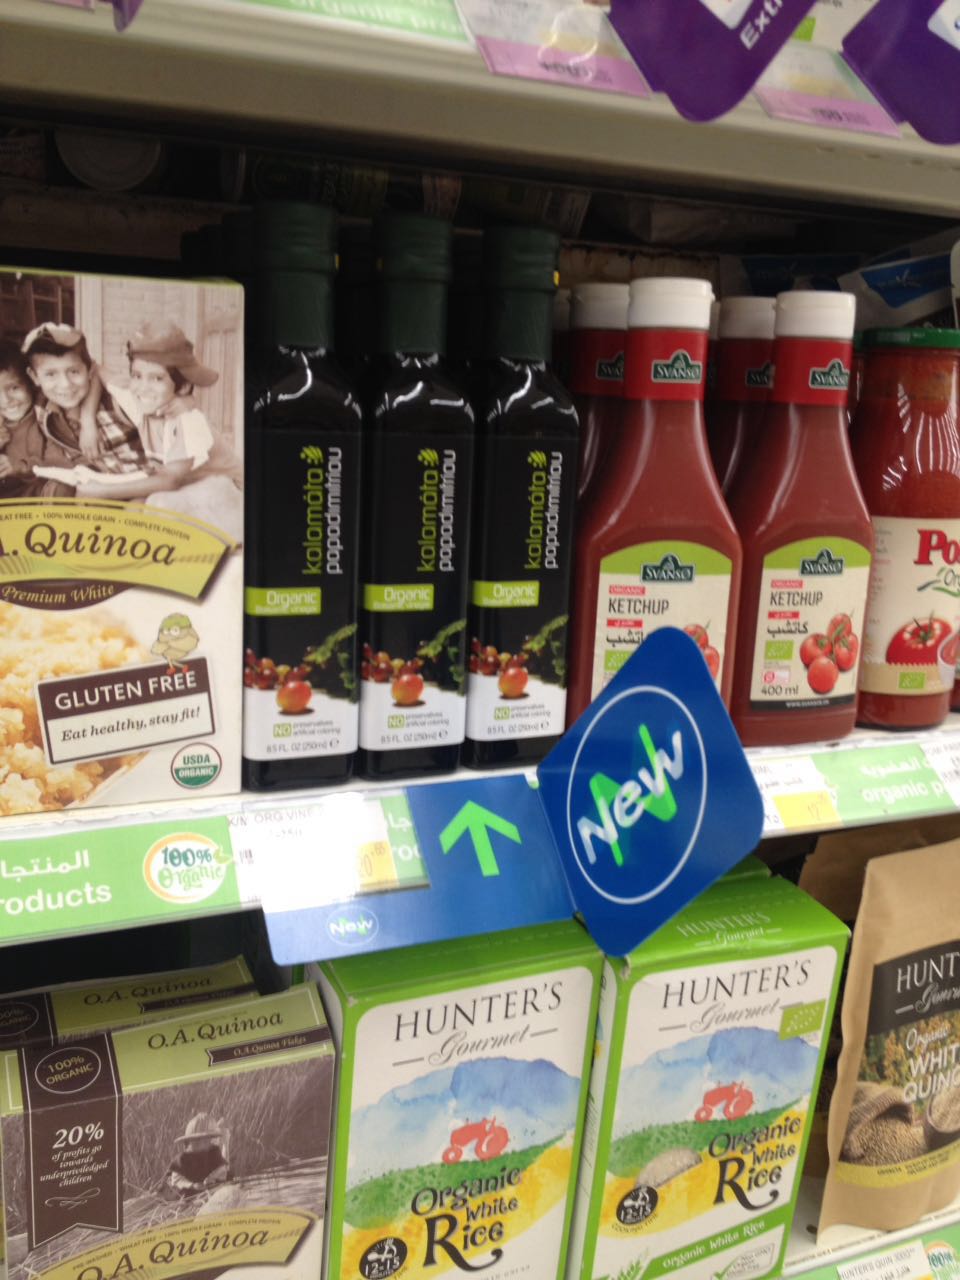 placement-of-kalamata-papadimitriou-products-in-carrefour-uae-3